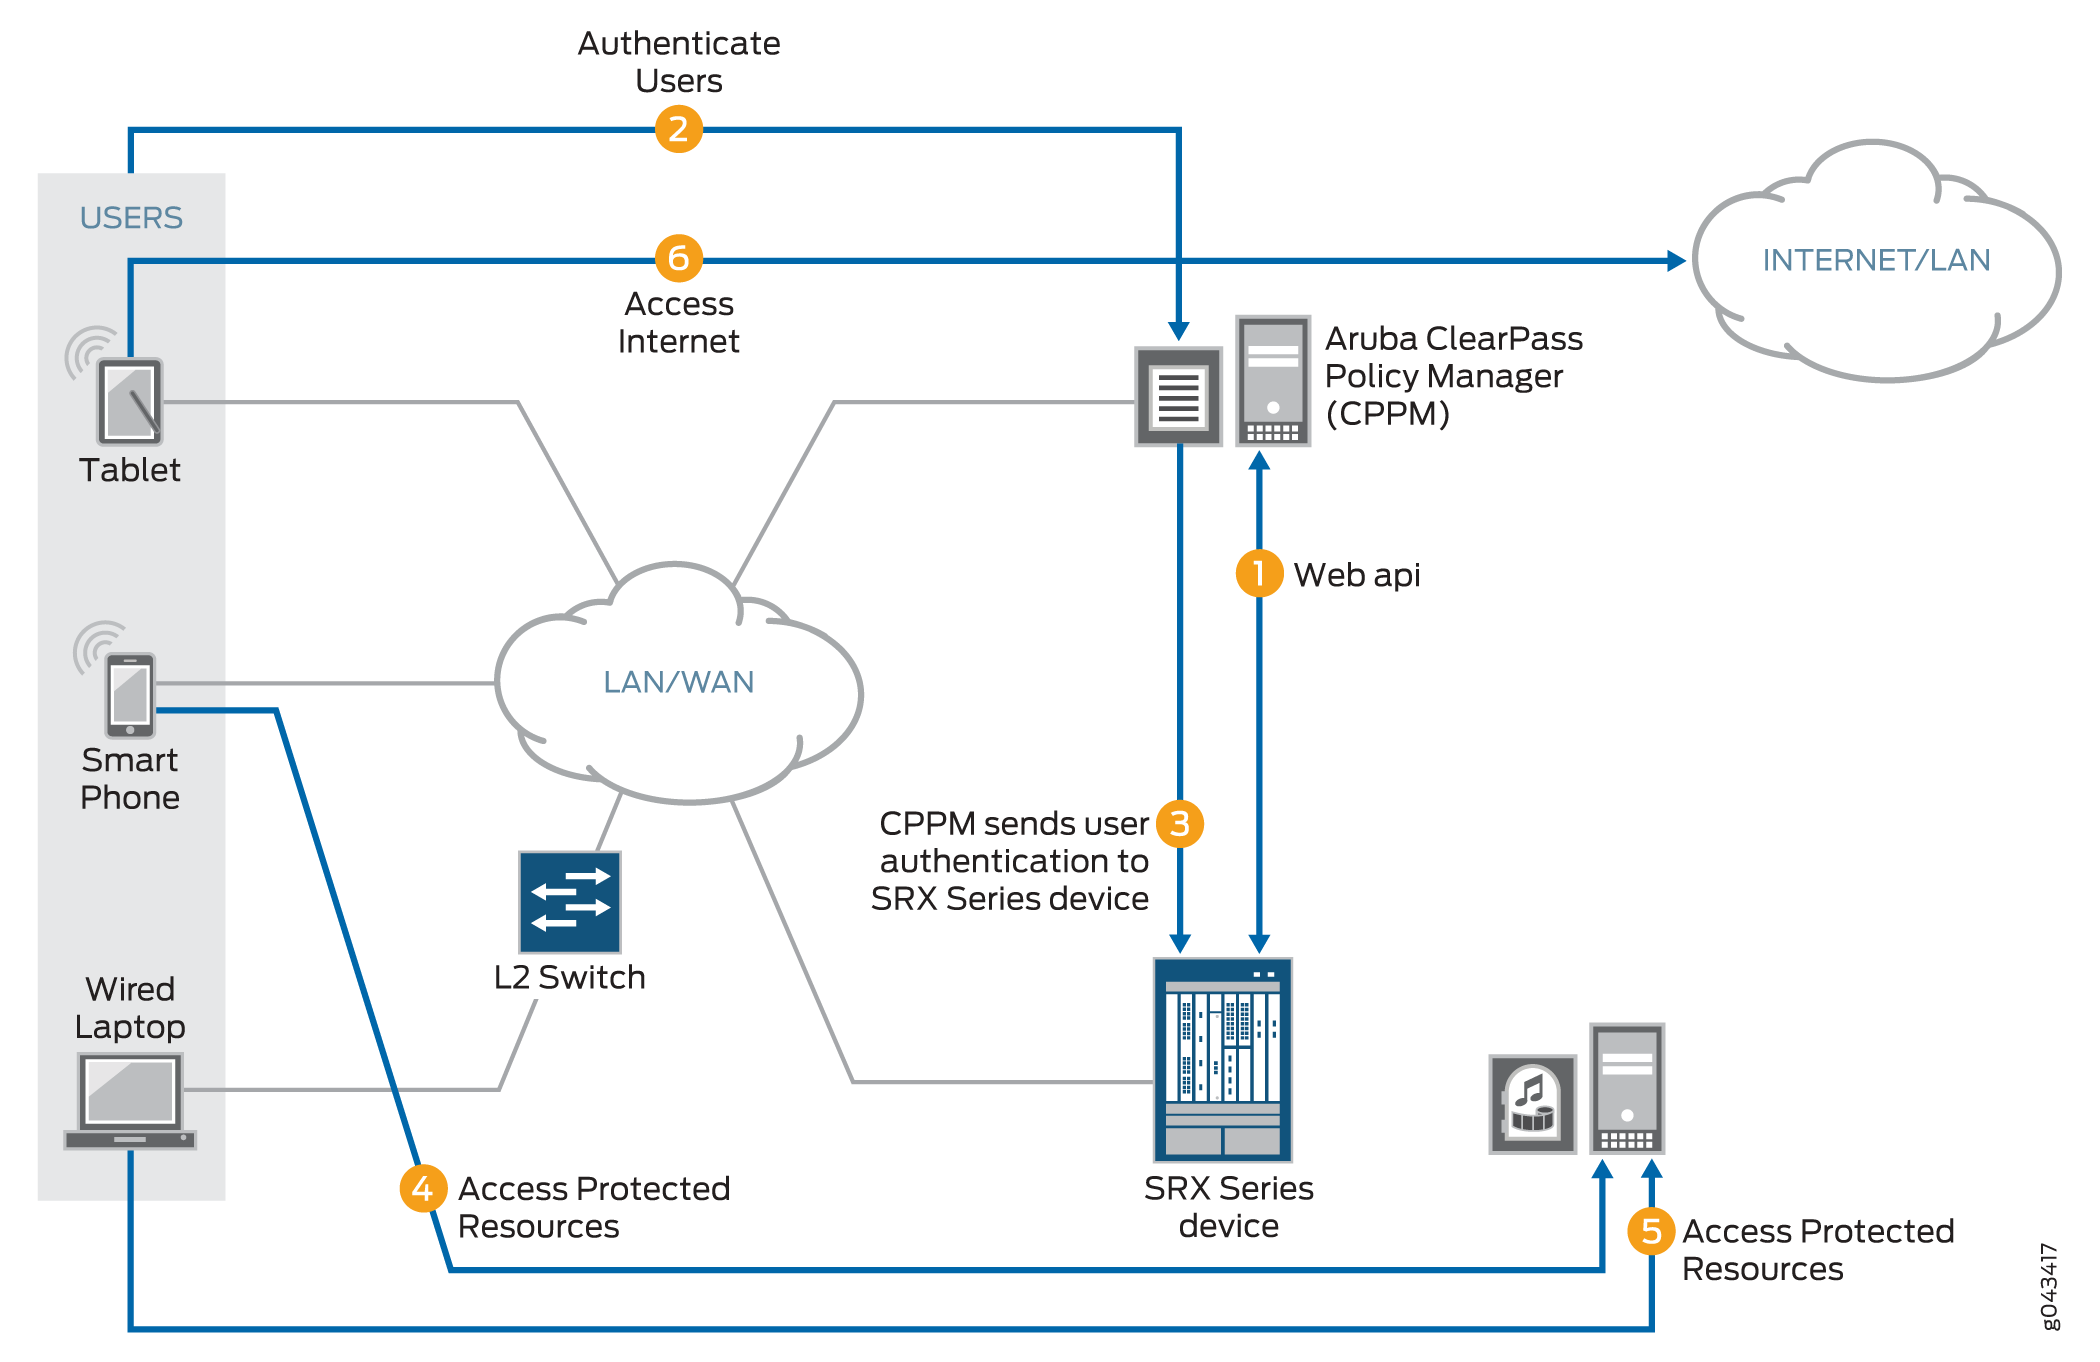 ClearPass and SRX Series Firewall Communication and User Authentication Process